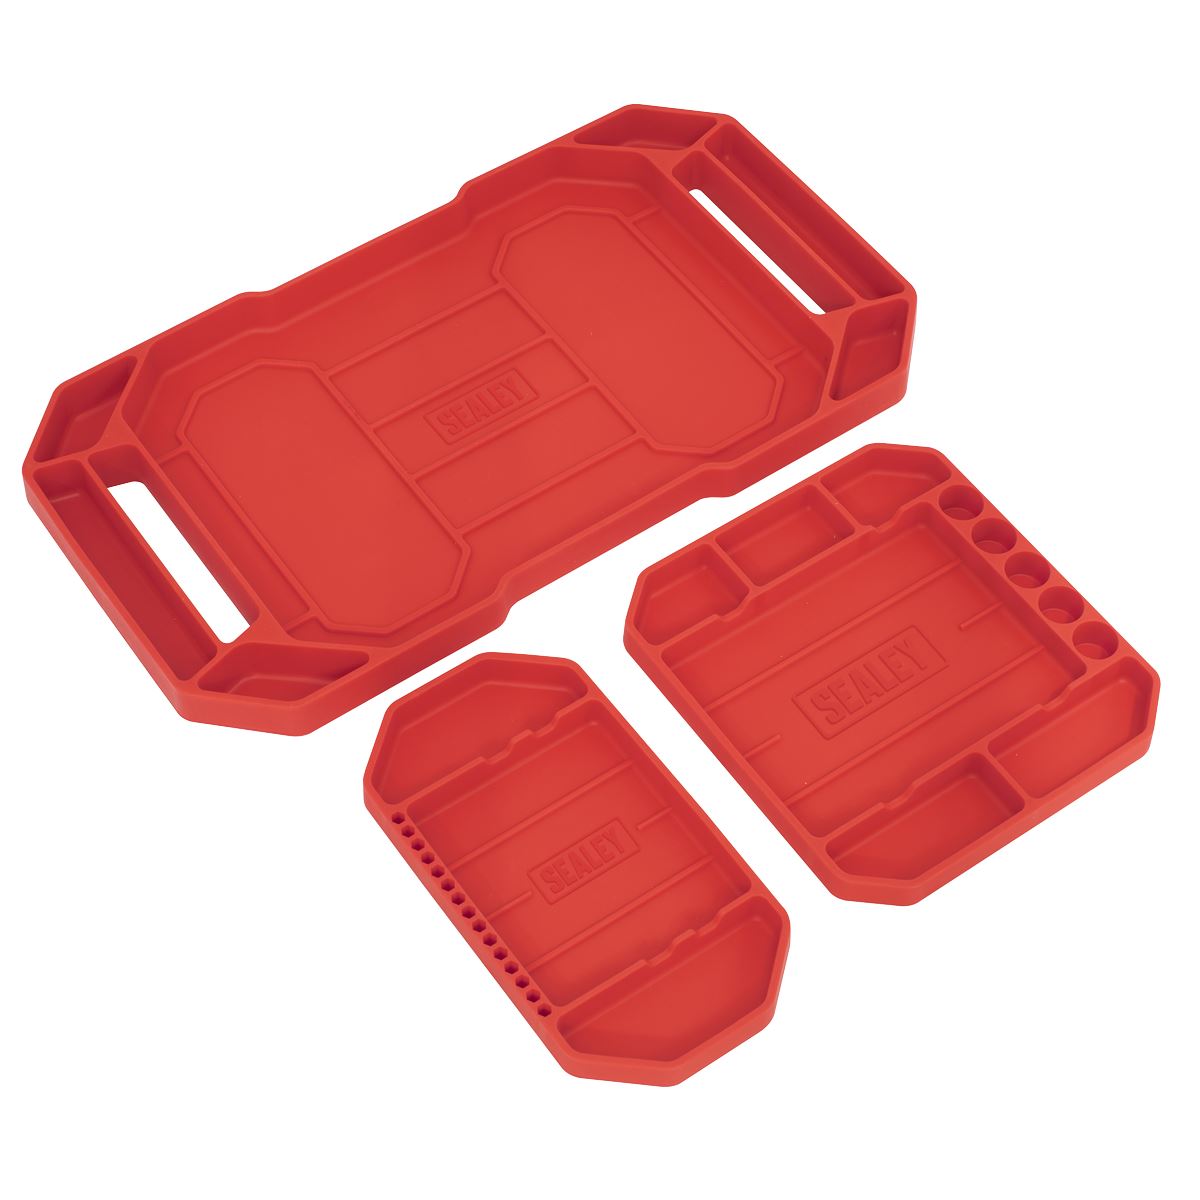 Sealey Flexible Tool Trays Non-Slip - Pack of 3